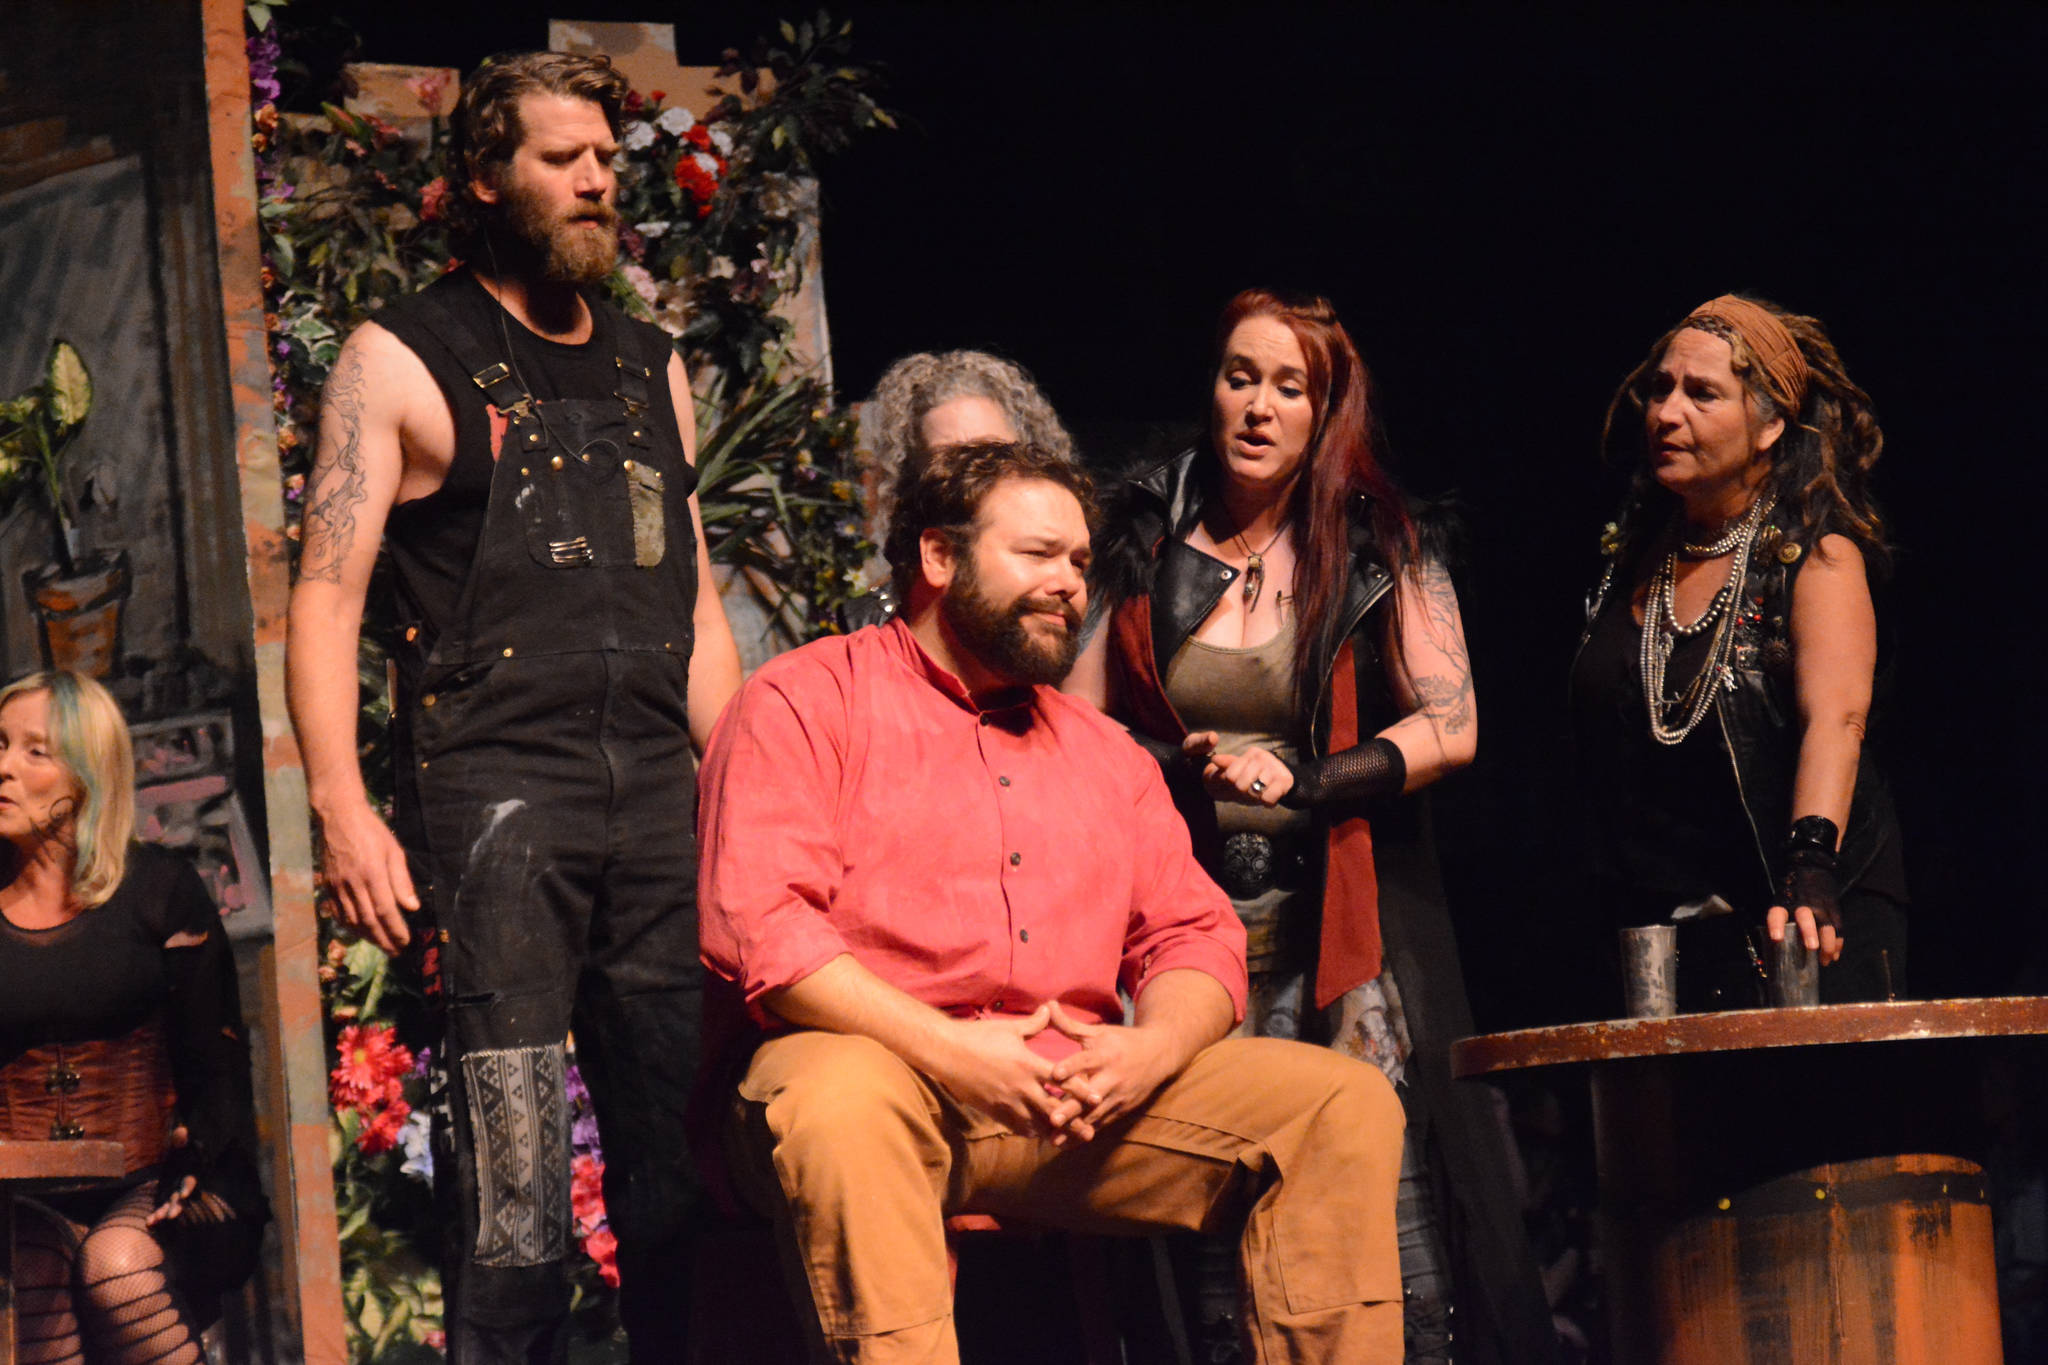 Curtis Jackson, left, as Judas, Kyle Schneider, center, as Jesus, Hannah Heimbuch, right, as Mary Magdalene, and Sally Oberstein, far right, as an apostle, rehearse a scene from “Jesus Christ Superstar” on Monday, Oct. 2, 2017 at the Mariner Theatre in Homer, Alaska. The musical opens Friday, Oct. 6. (Photo by Michael Armstrong, Homer News)